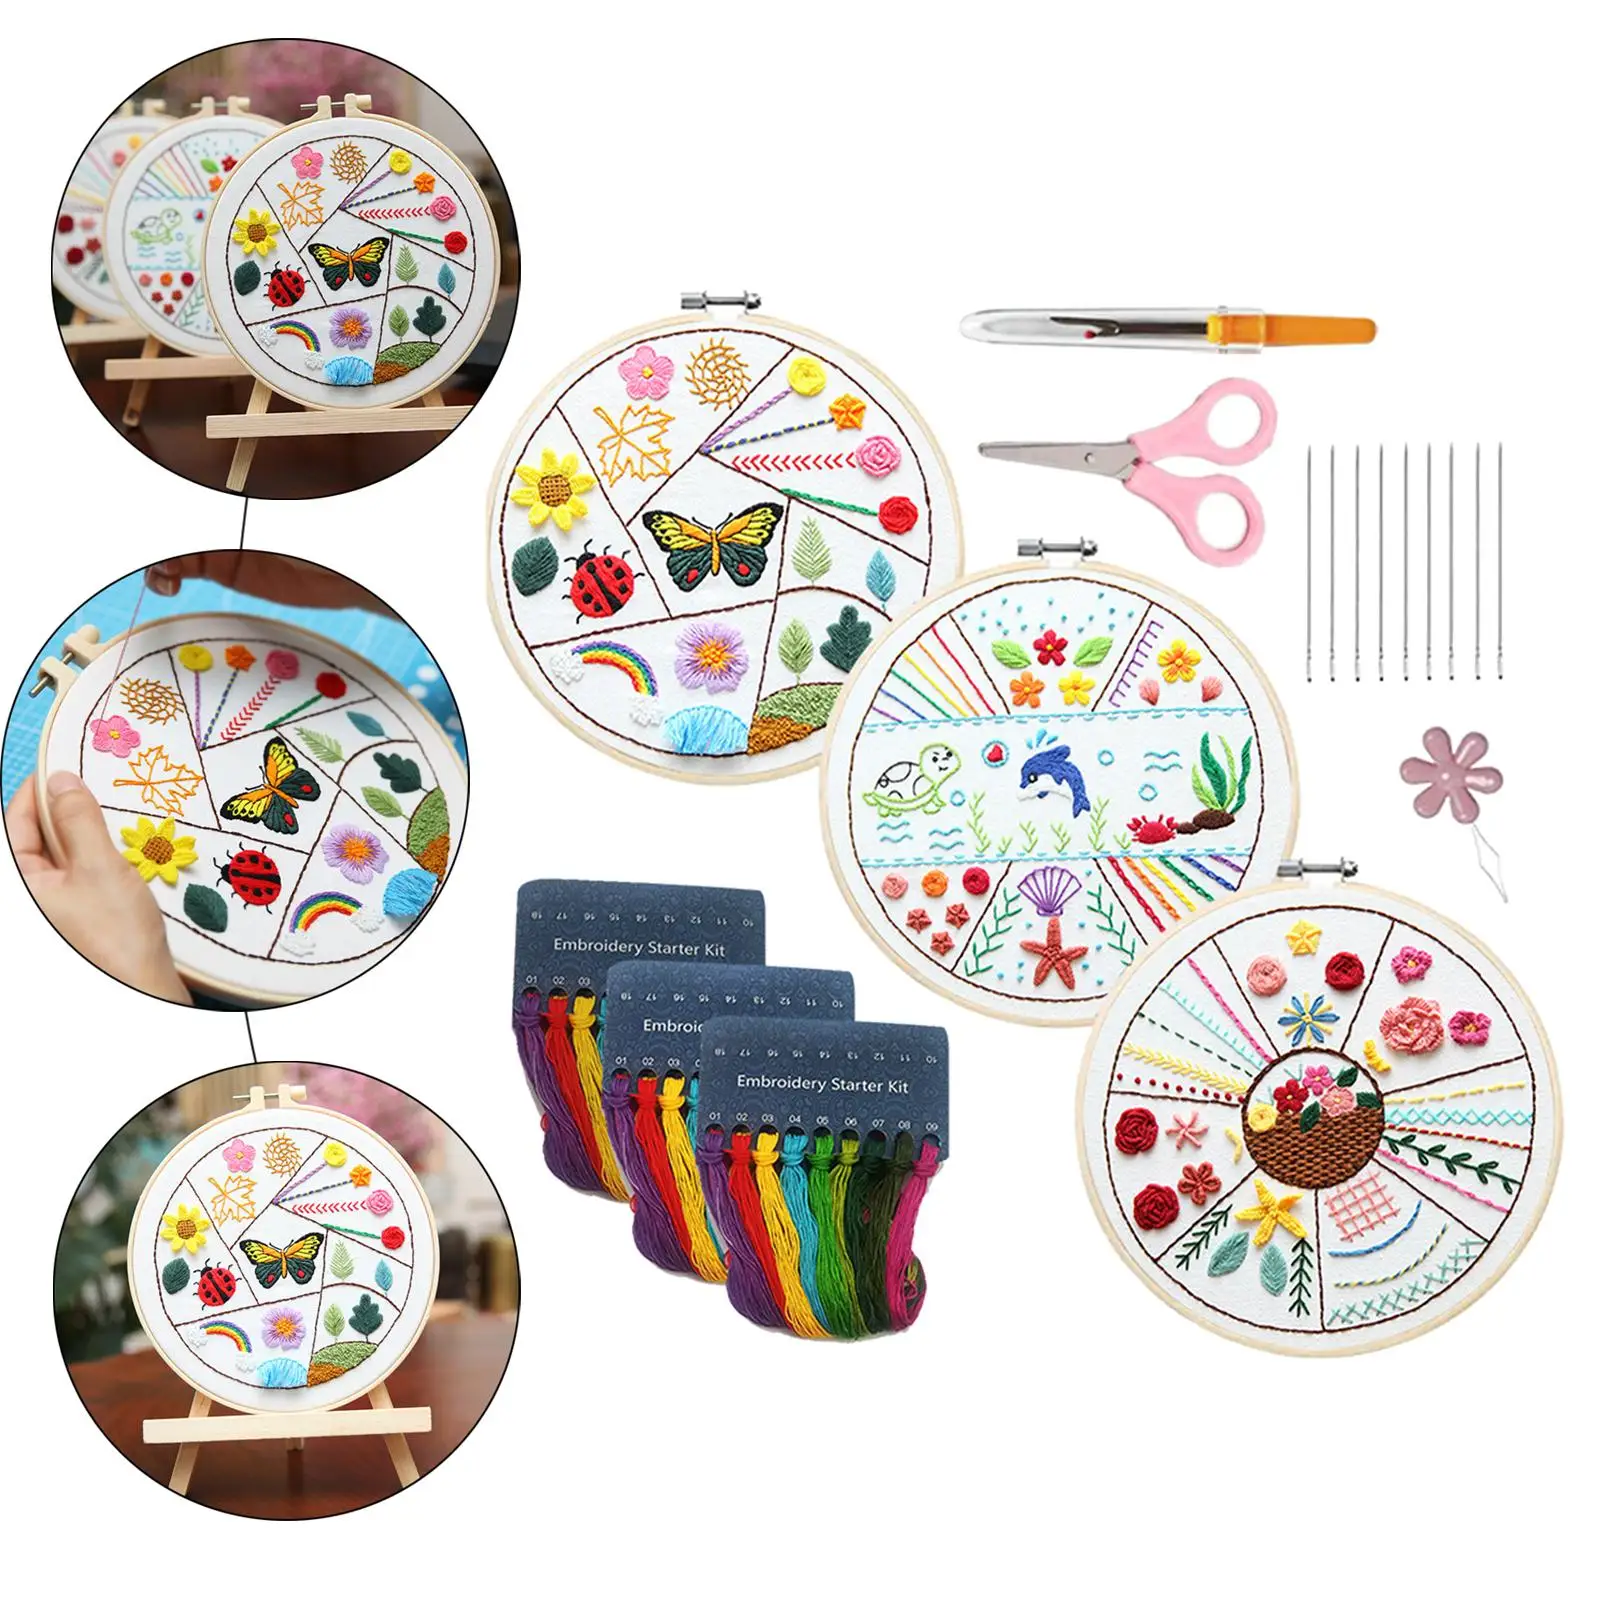 Embroidery Stitch Practice Kit with Pattern Decoration Durable Gift with Embroidery Hoop for Beginners Needlework DIY Practice